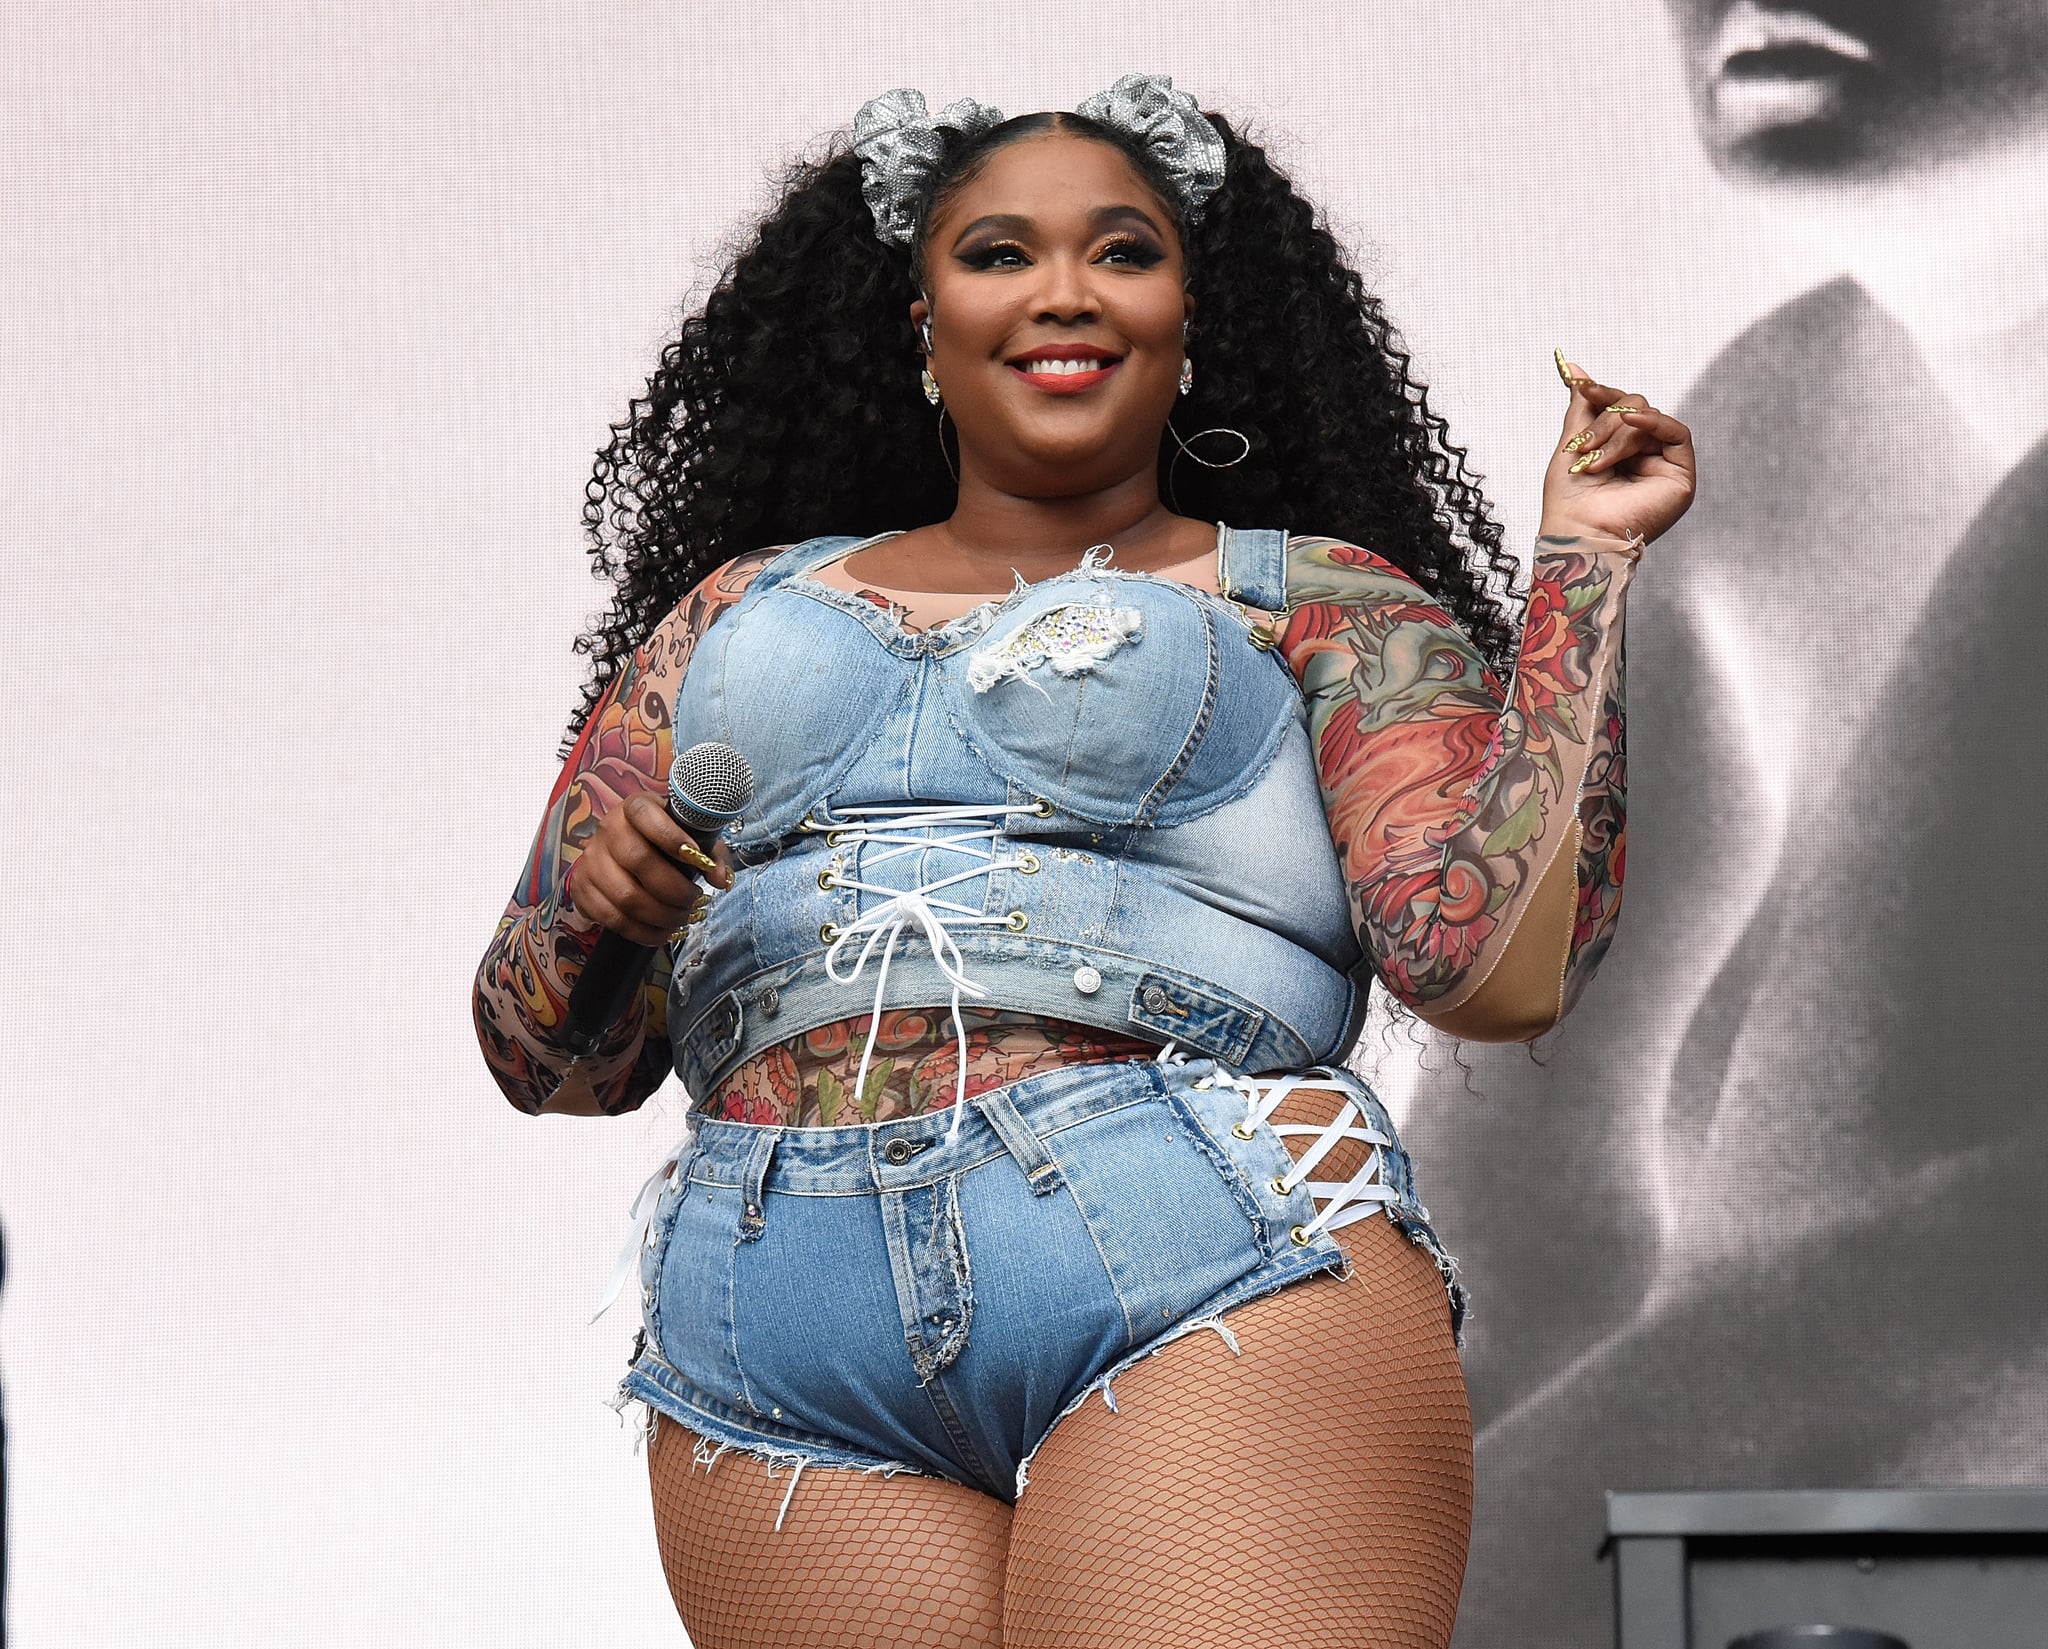 PHILADELPHIA, PA - SEPTEMBER 01:  Lizzo performs at Made in America - Day 2  at Benjamin Franklin Parkway on August 31, 2019 in Philadelphia, Pennsylvania.  (Photo by Arik McArthur/WireImage)